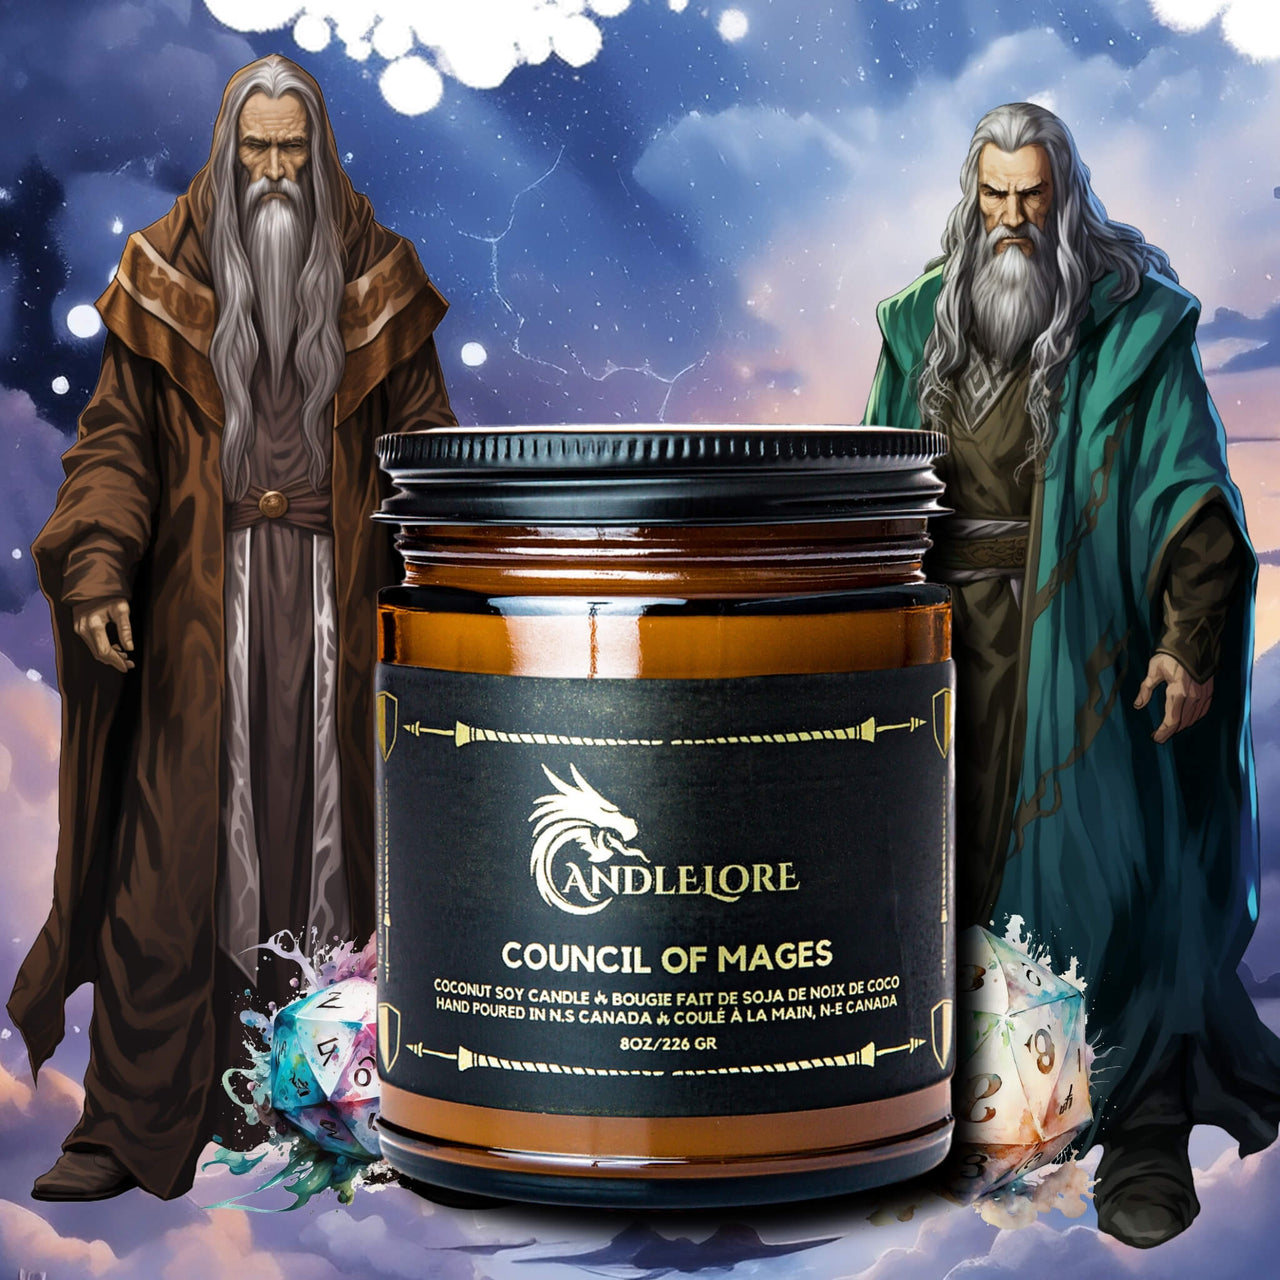 2 older wizards on either side of a candle